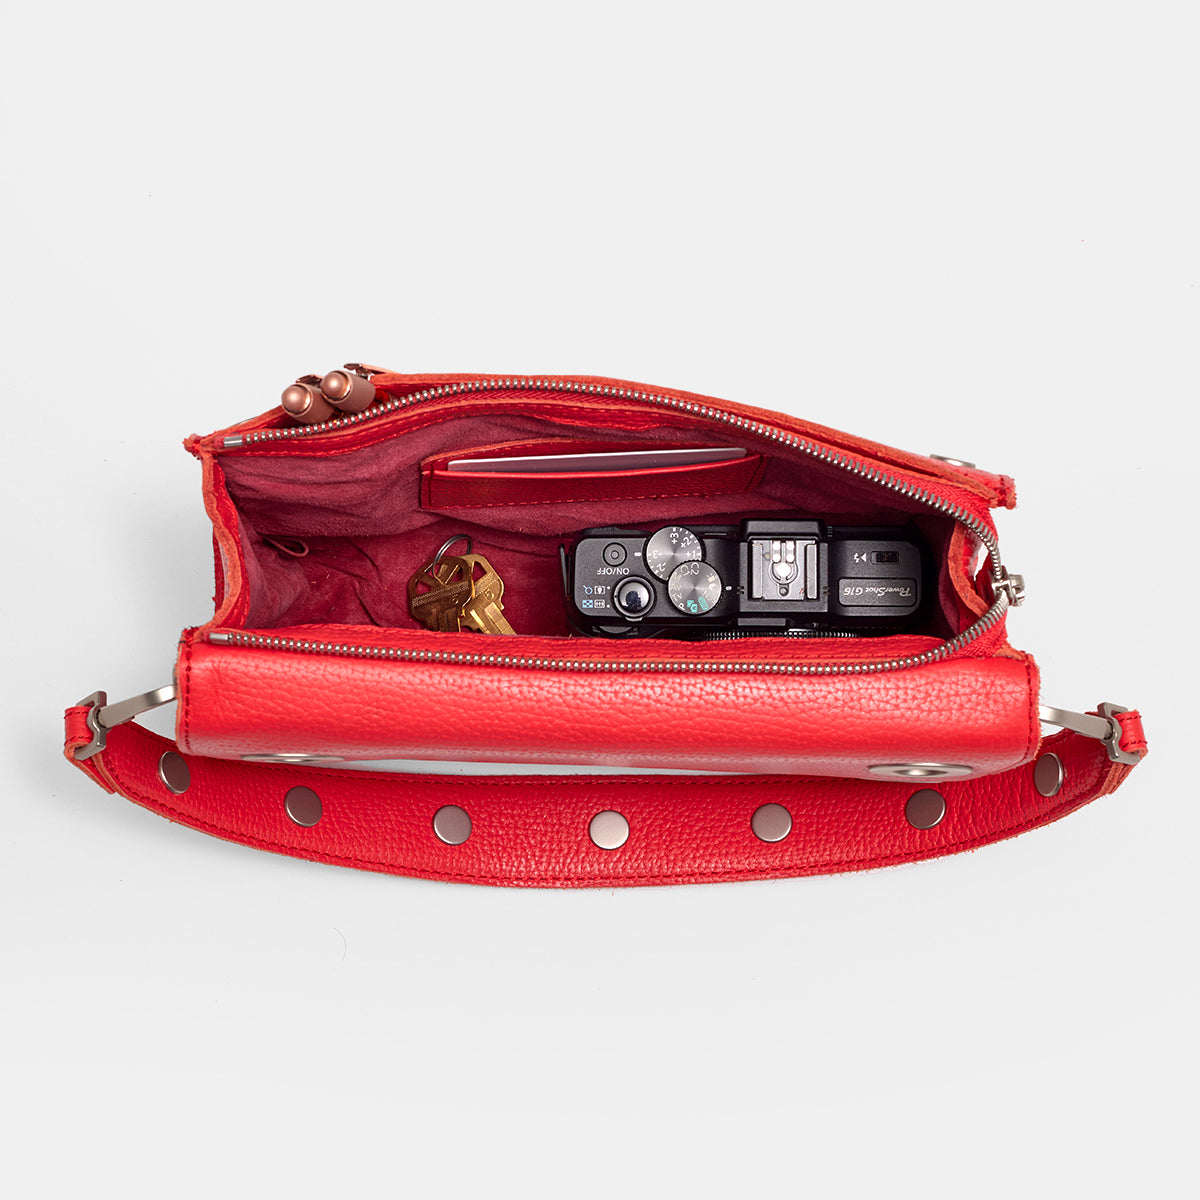 Montana-Clutch-Sml-Lighthouse-Red-Inside-View